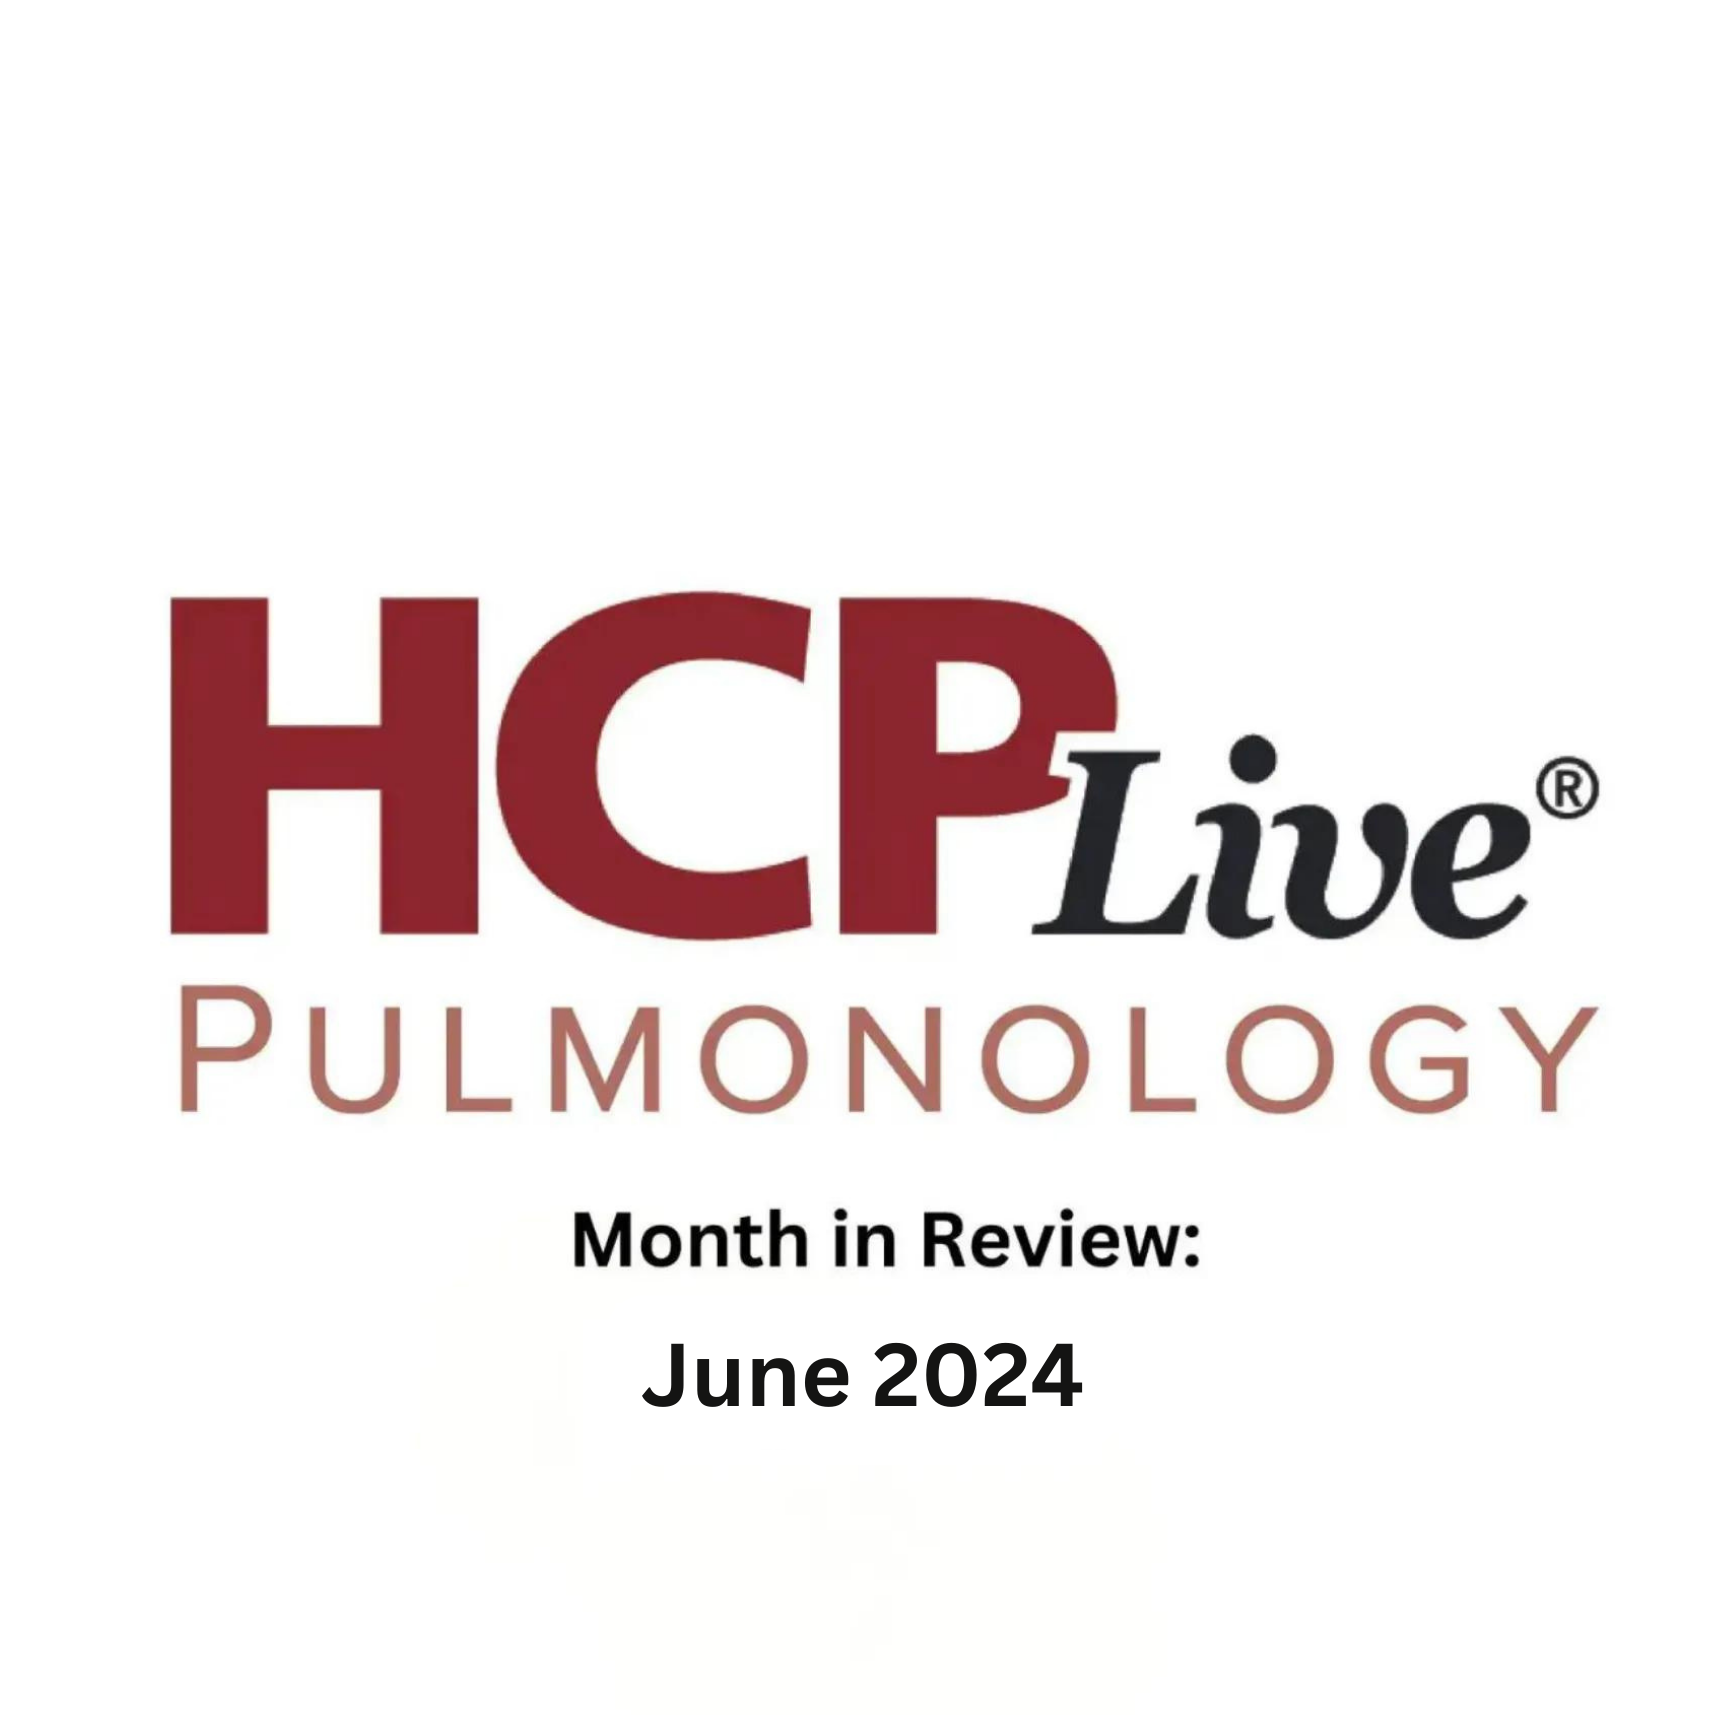 Pulmonology Month in Review: June 2024